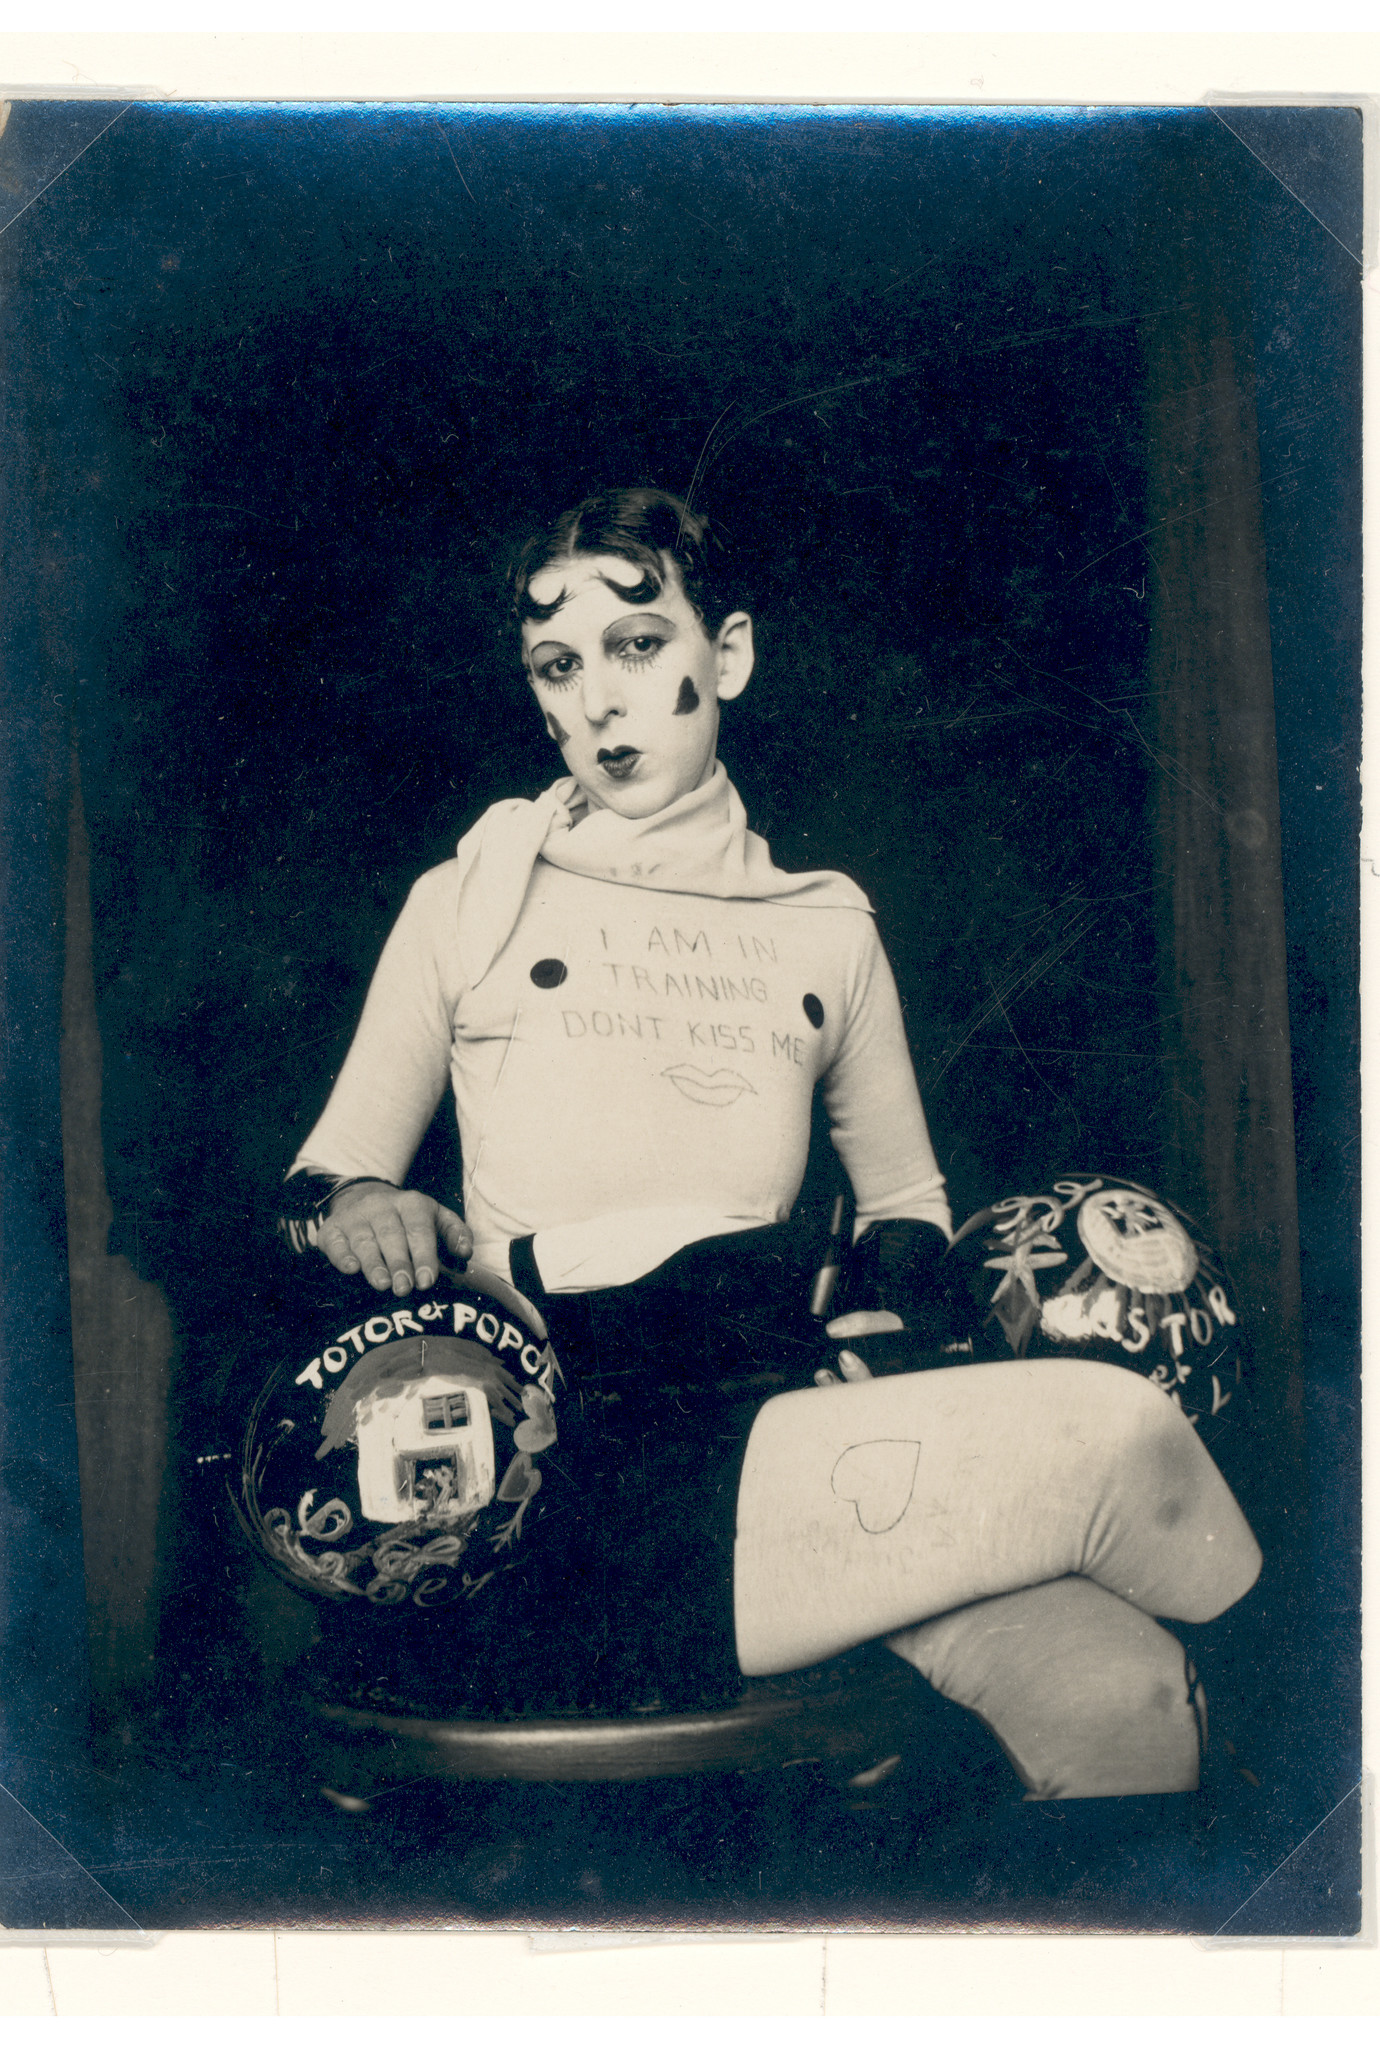 Claude Cahun, I am in training, don’t kiss me, 1927, Courtesy and copyright Jersey Heritage